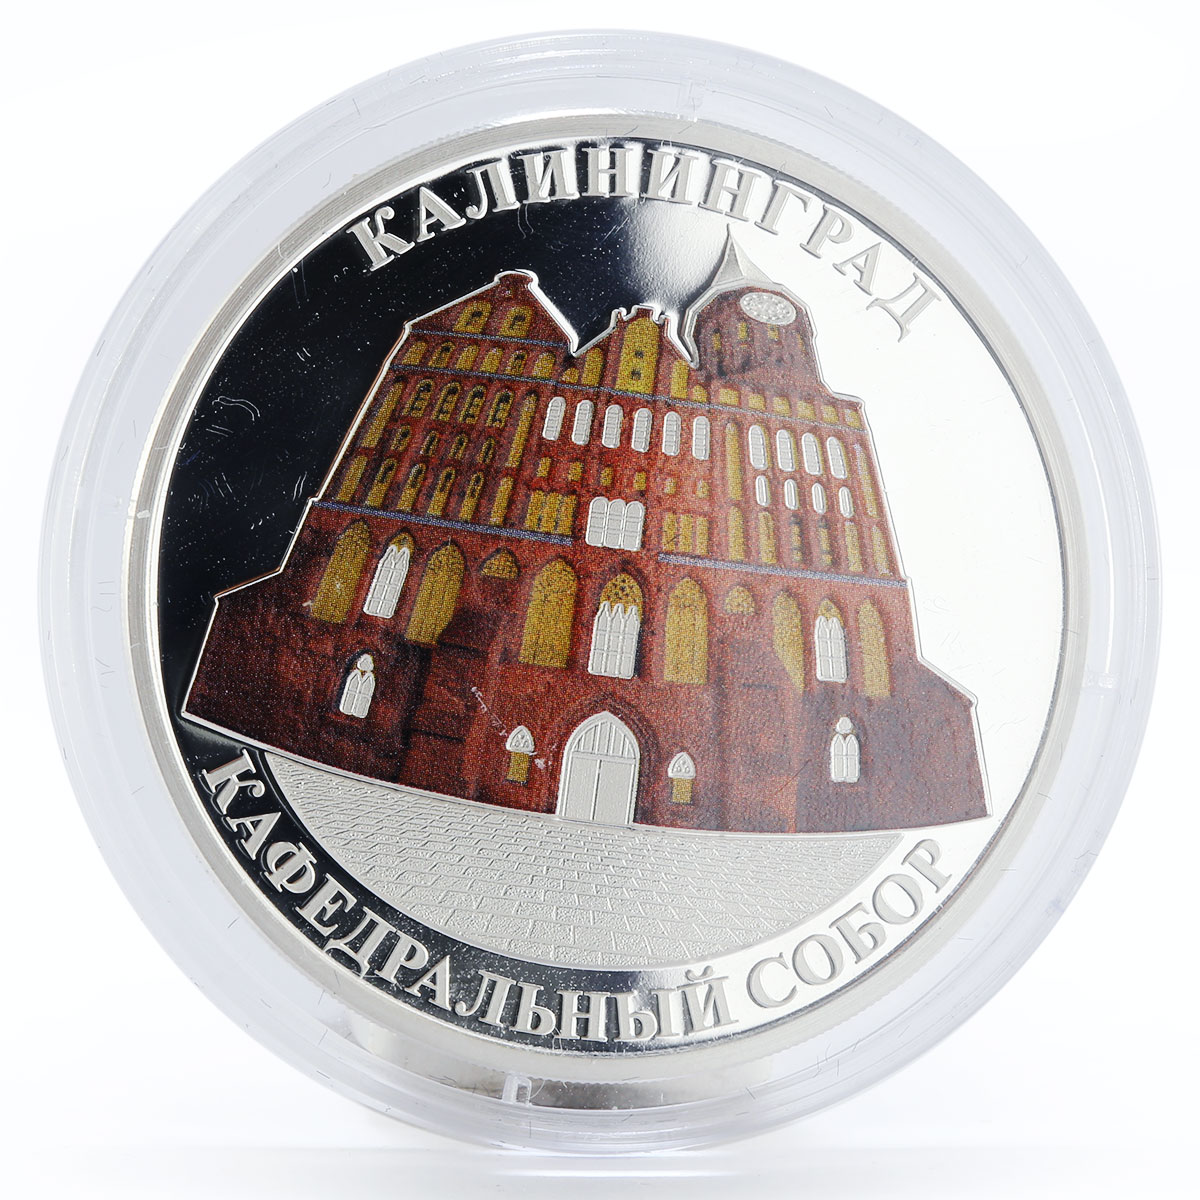 Cameroon 1000 francs Kaliningrad Cathedral church colored silver coin 2020